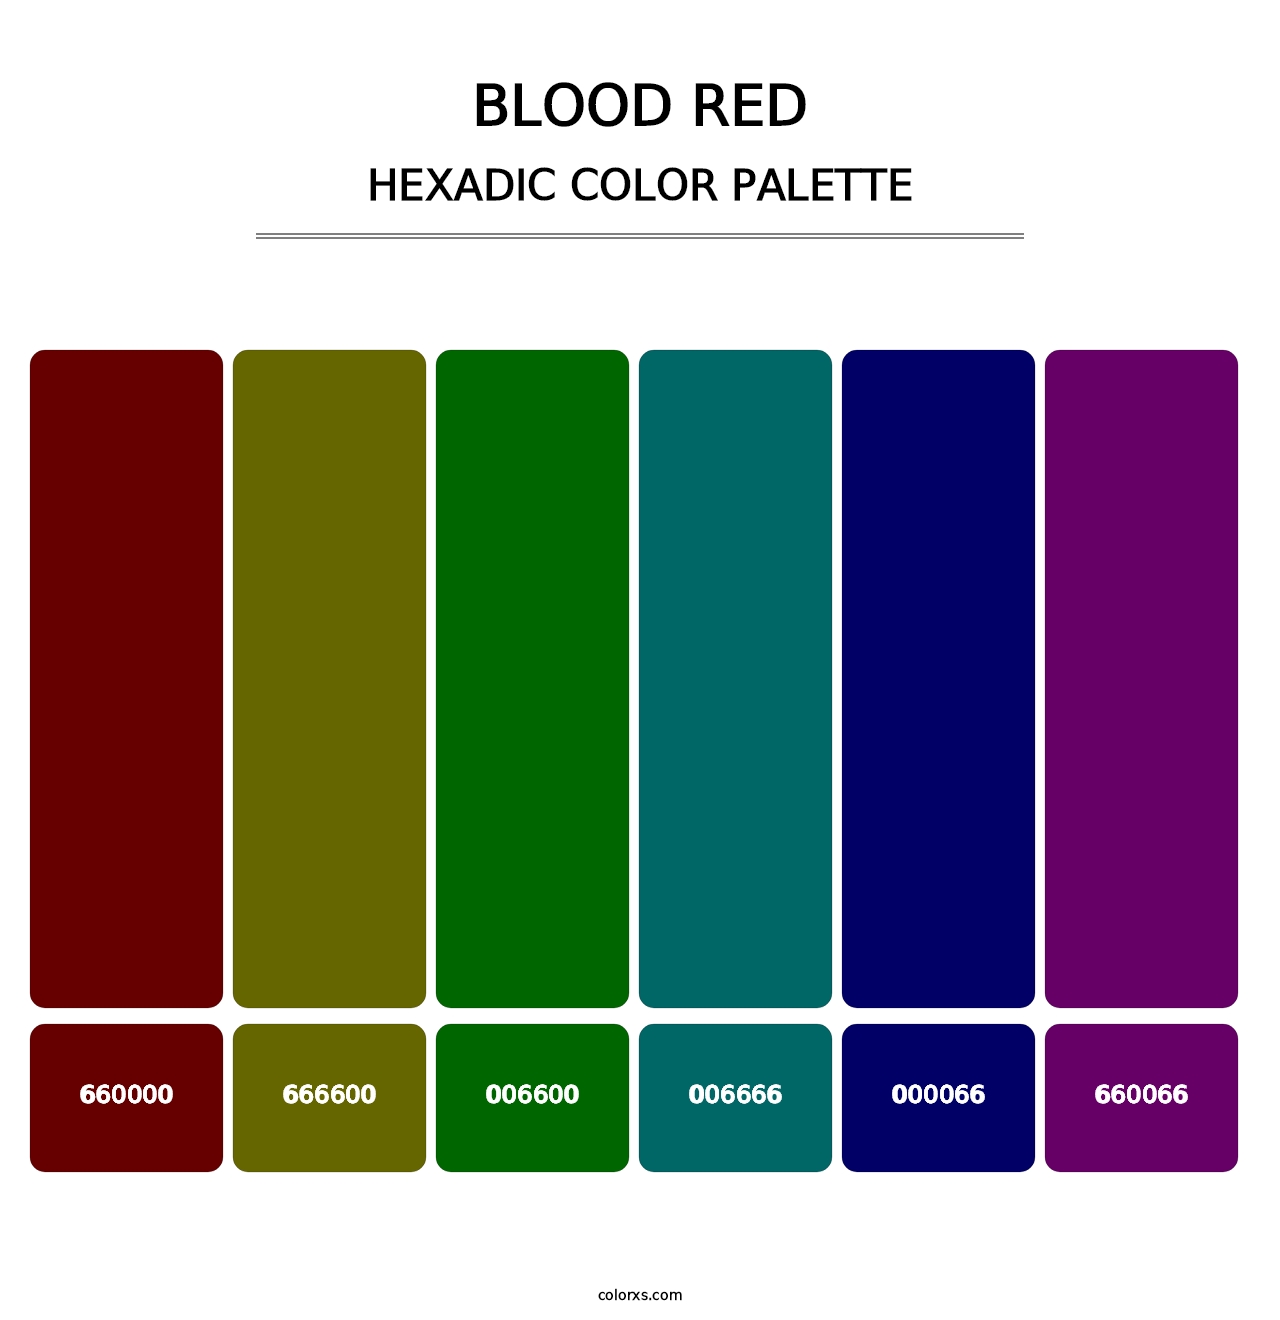 Blood Red - Hexadic Color Palette